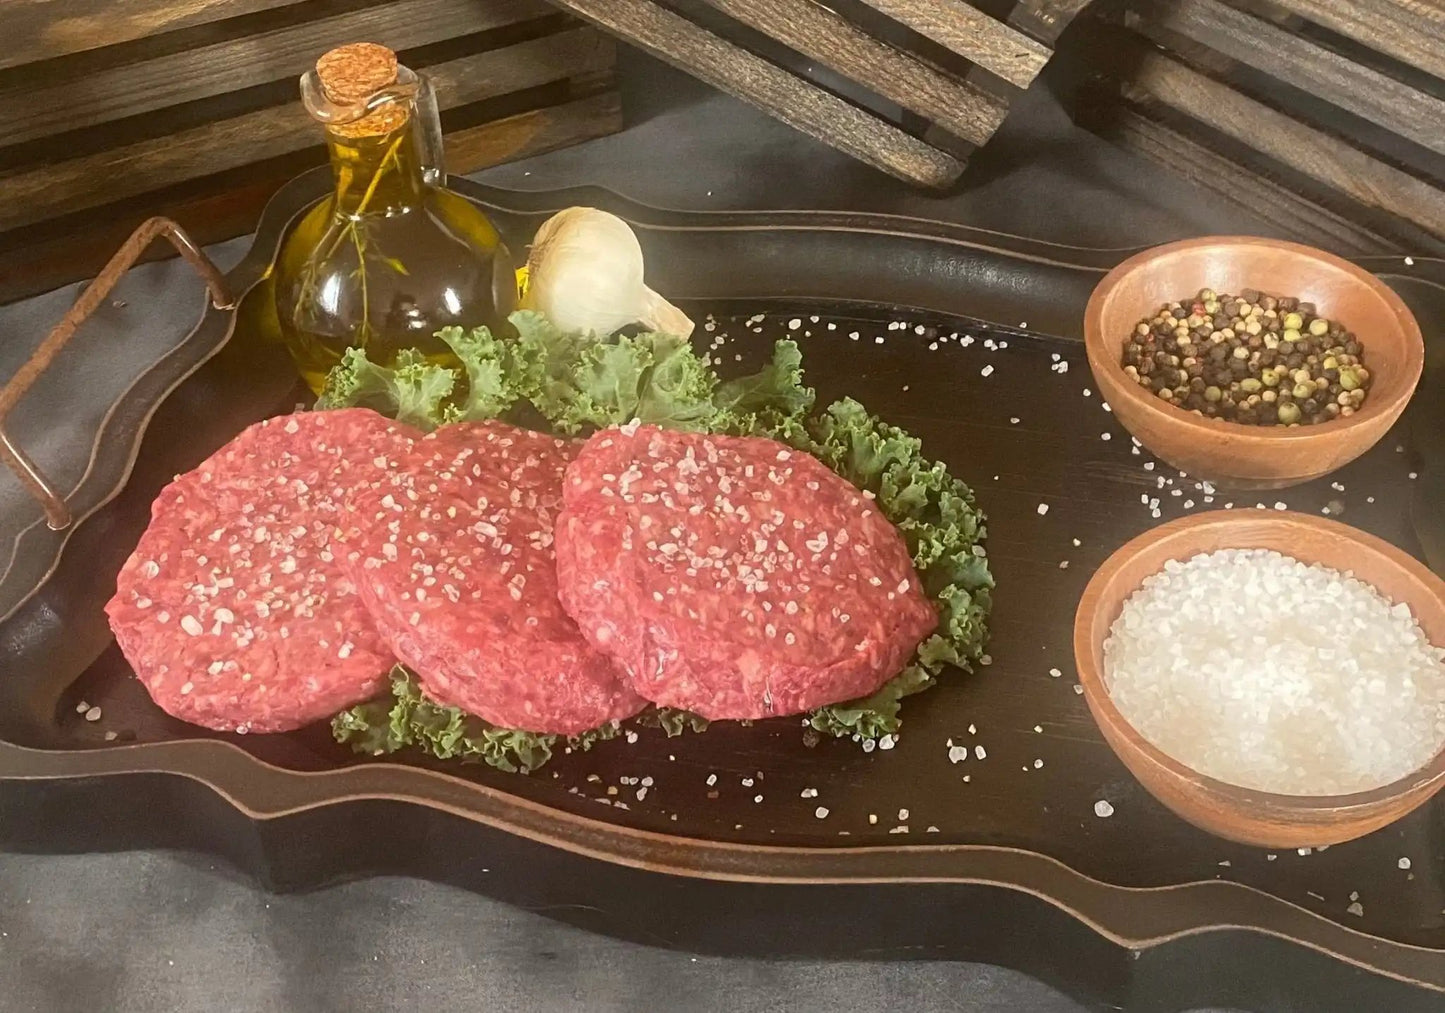 100% All-Natural Grass-fed American Wagyu (3) 1/3lb Beef Patties - The Hufeisen-Ranch (WYO Wagyu)